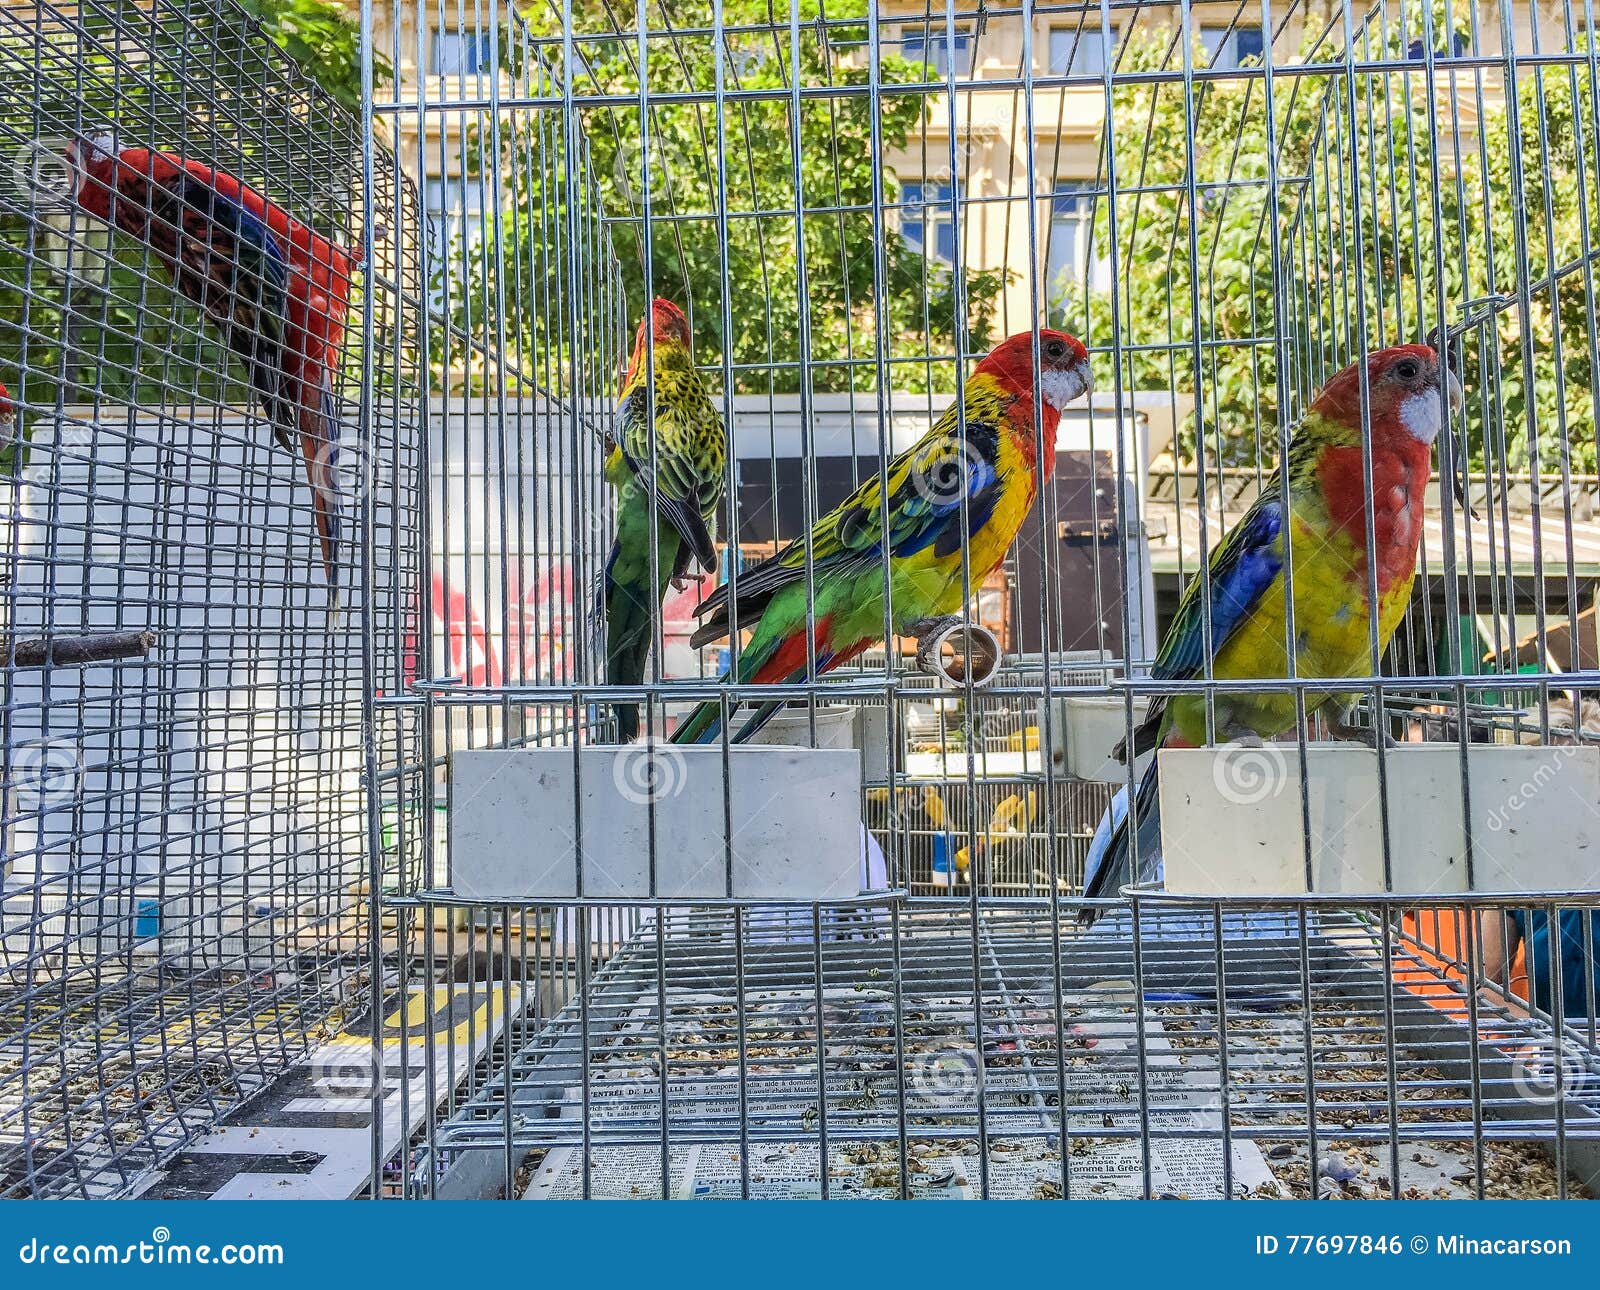 Colorful Caged Parakeets At Bird Market In Paris France Editorial